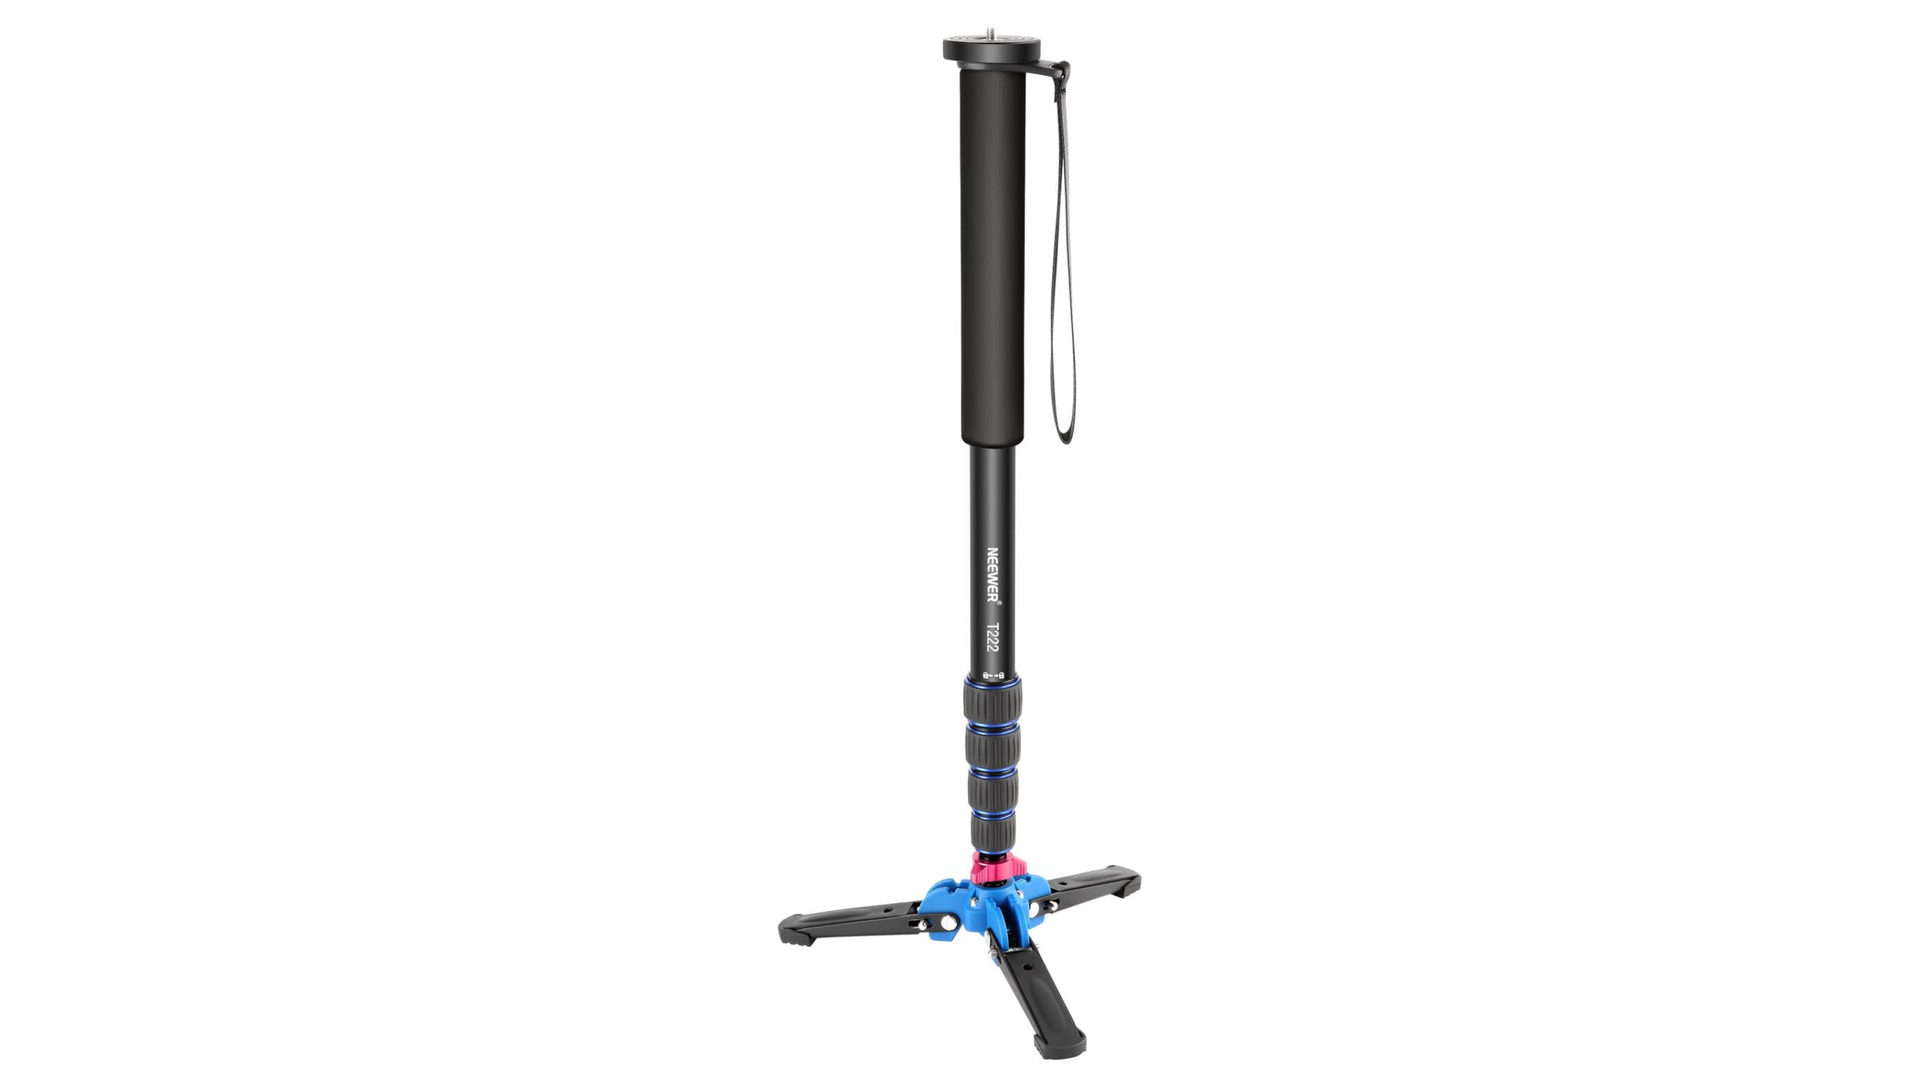 Neewer Extendable Camera Monopod with Removable Foldable Tripod Support Base